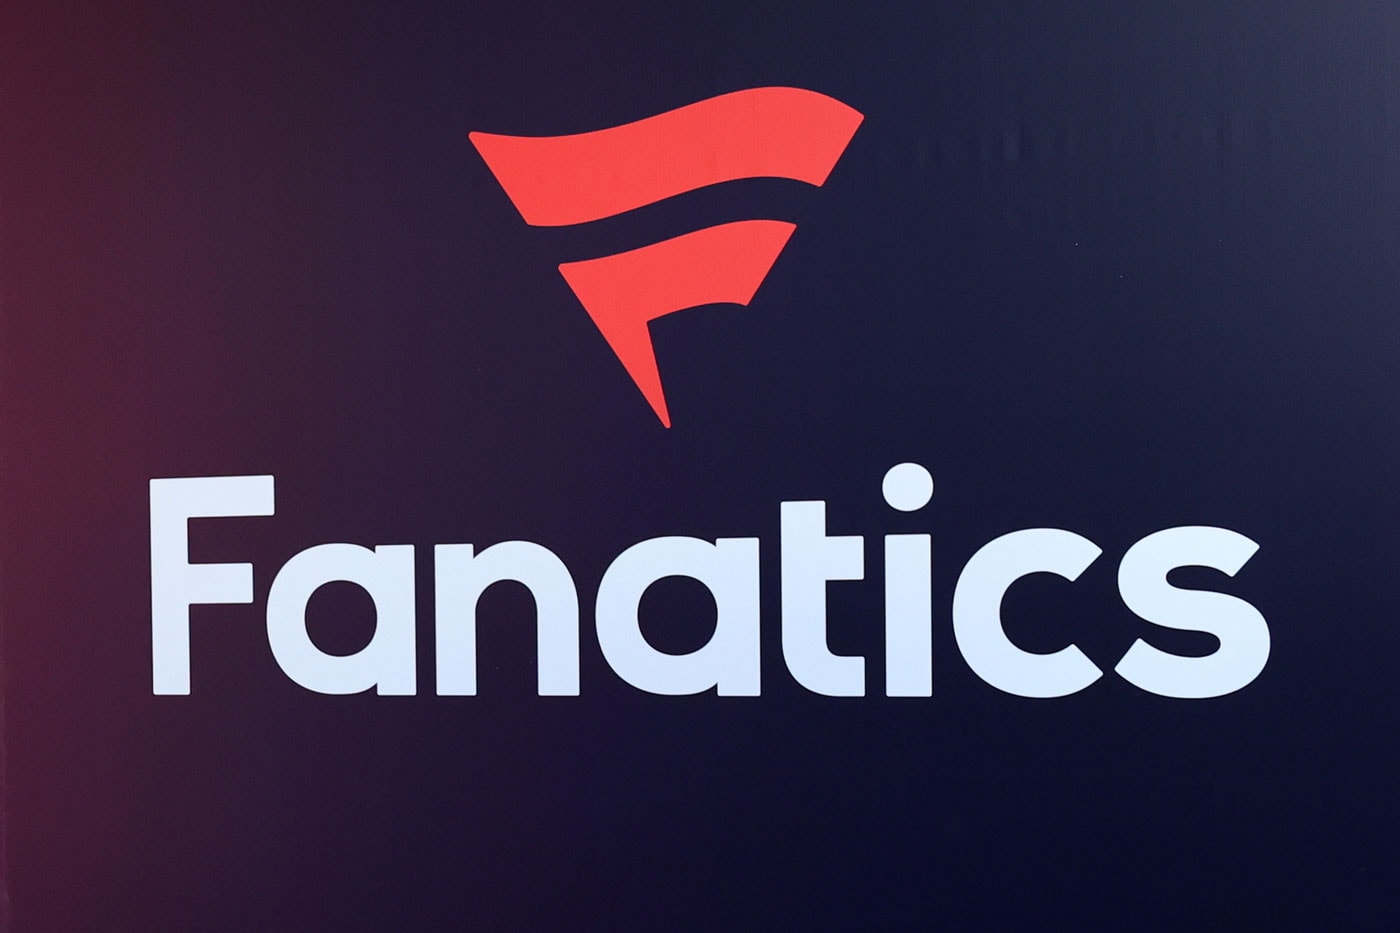 Sports Platform Fanatics Now Valued at $27 Billion USD After Latest Funding Round nhl nba mlbsports commerce powerhouse betting media business jay-z mitchell & ness trading cards collectables